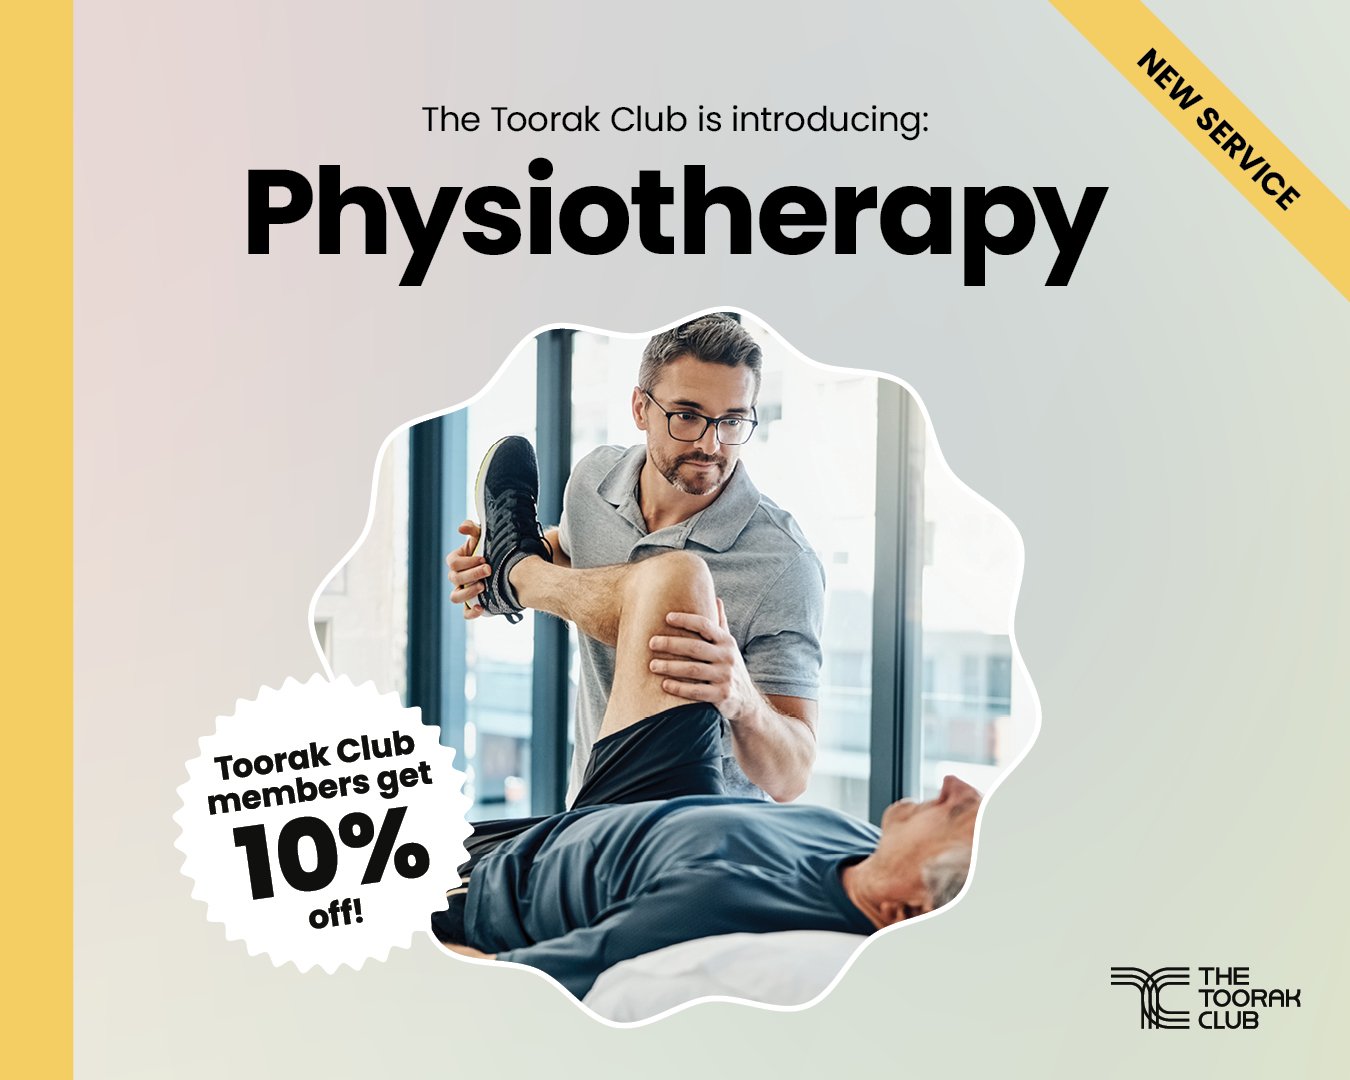 Get back to your best with Physiotherapy at The Toorak Club!

Are you dealing with pain, stiffness, or a recent sports or spinal injury? We're here to help! The Toorak Club is proud to offer comprehensive physiotherapy services designed to support yo